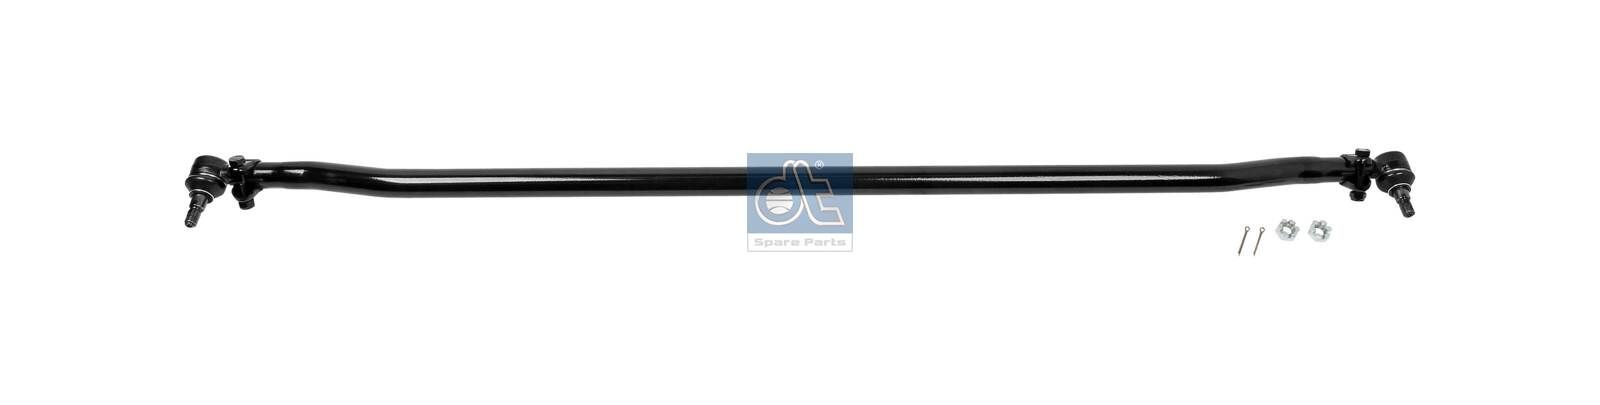 DT Spare Parts 4.67440 Rod Assembly A 602 330 0303